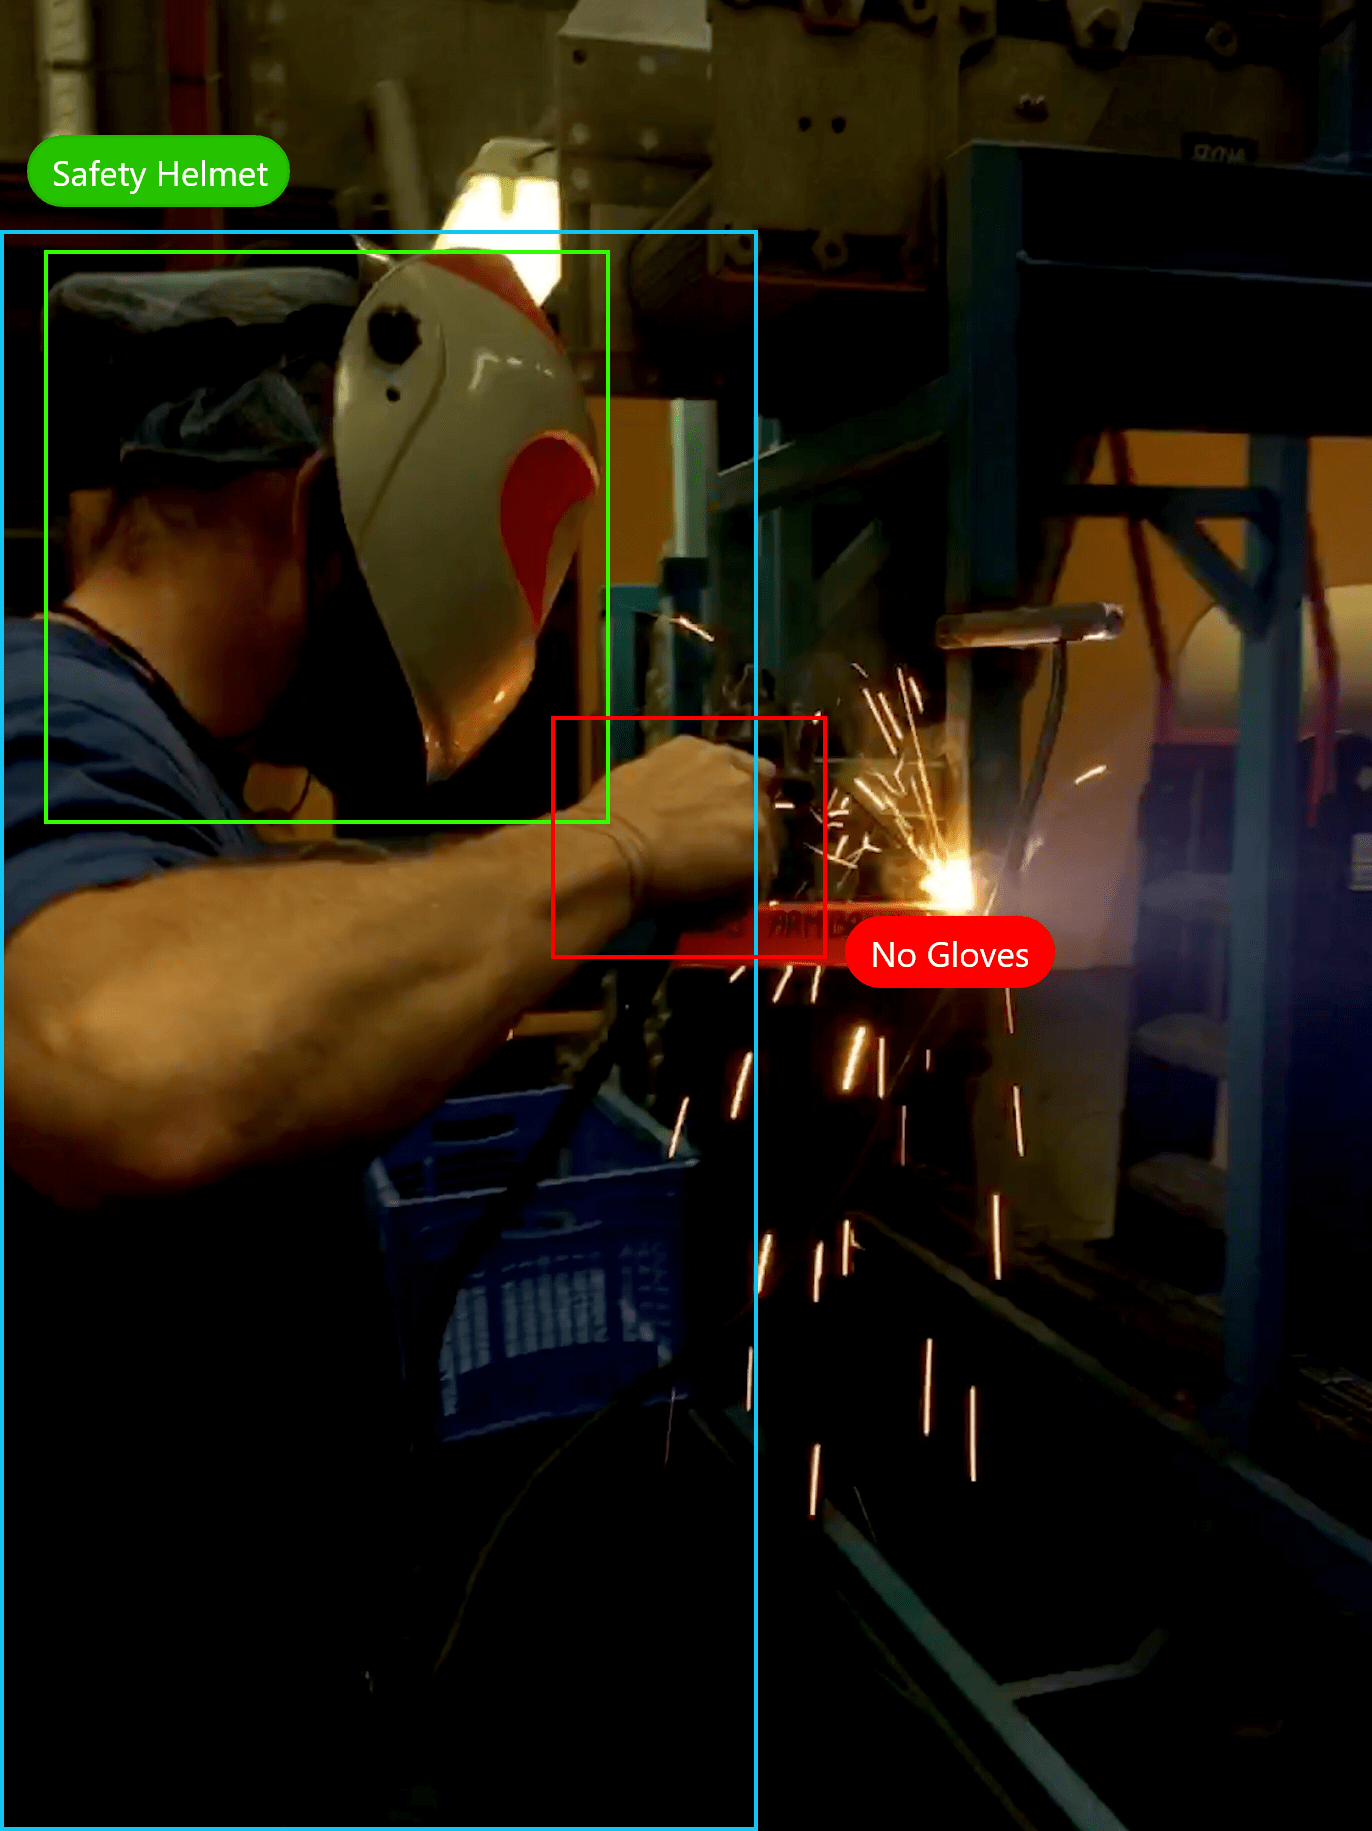 annotated image of a person working in a factory